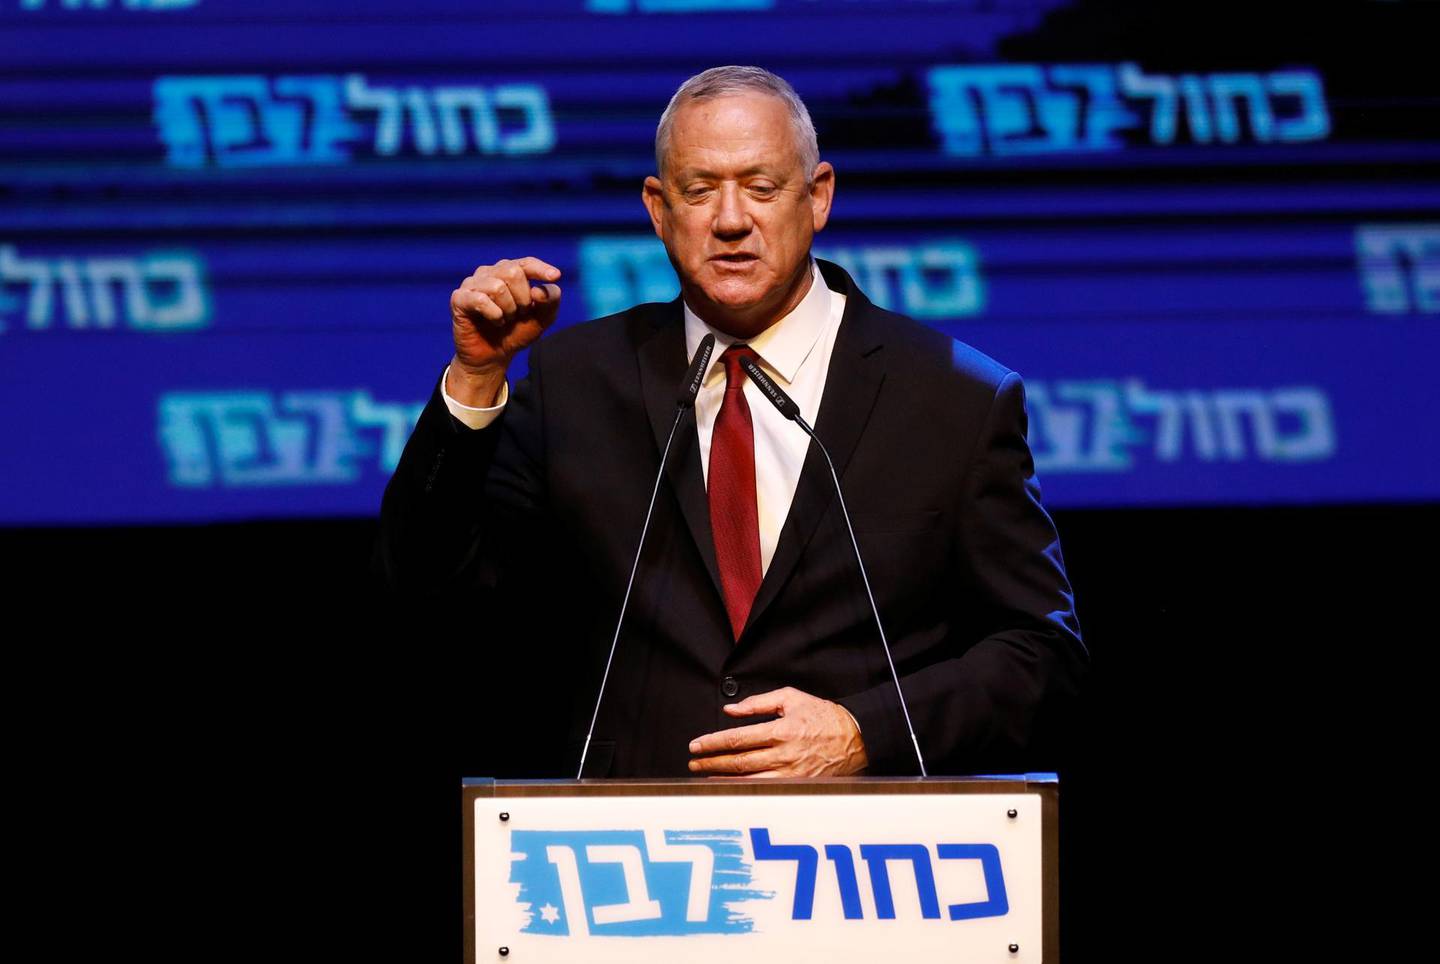 Blue and White party leader Benny Gantz reacts at the party's headquarters following the announcement of exit polls during Israel's parliamentary election in Tel Aviv, Israel September 18, 2019. REUTERS/Amir Cohen